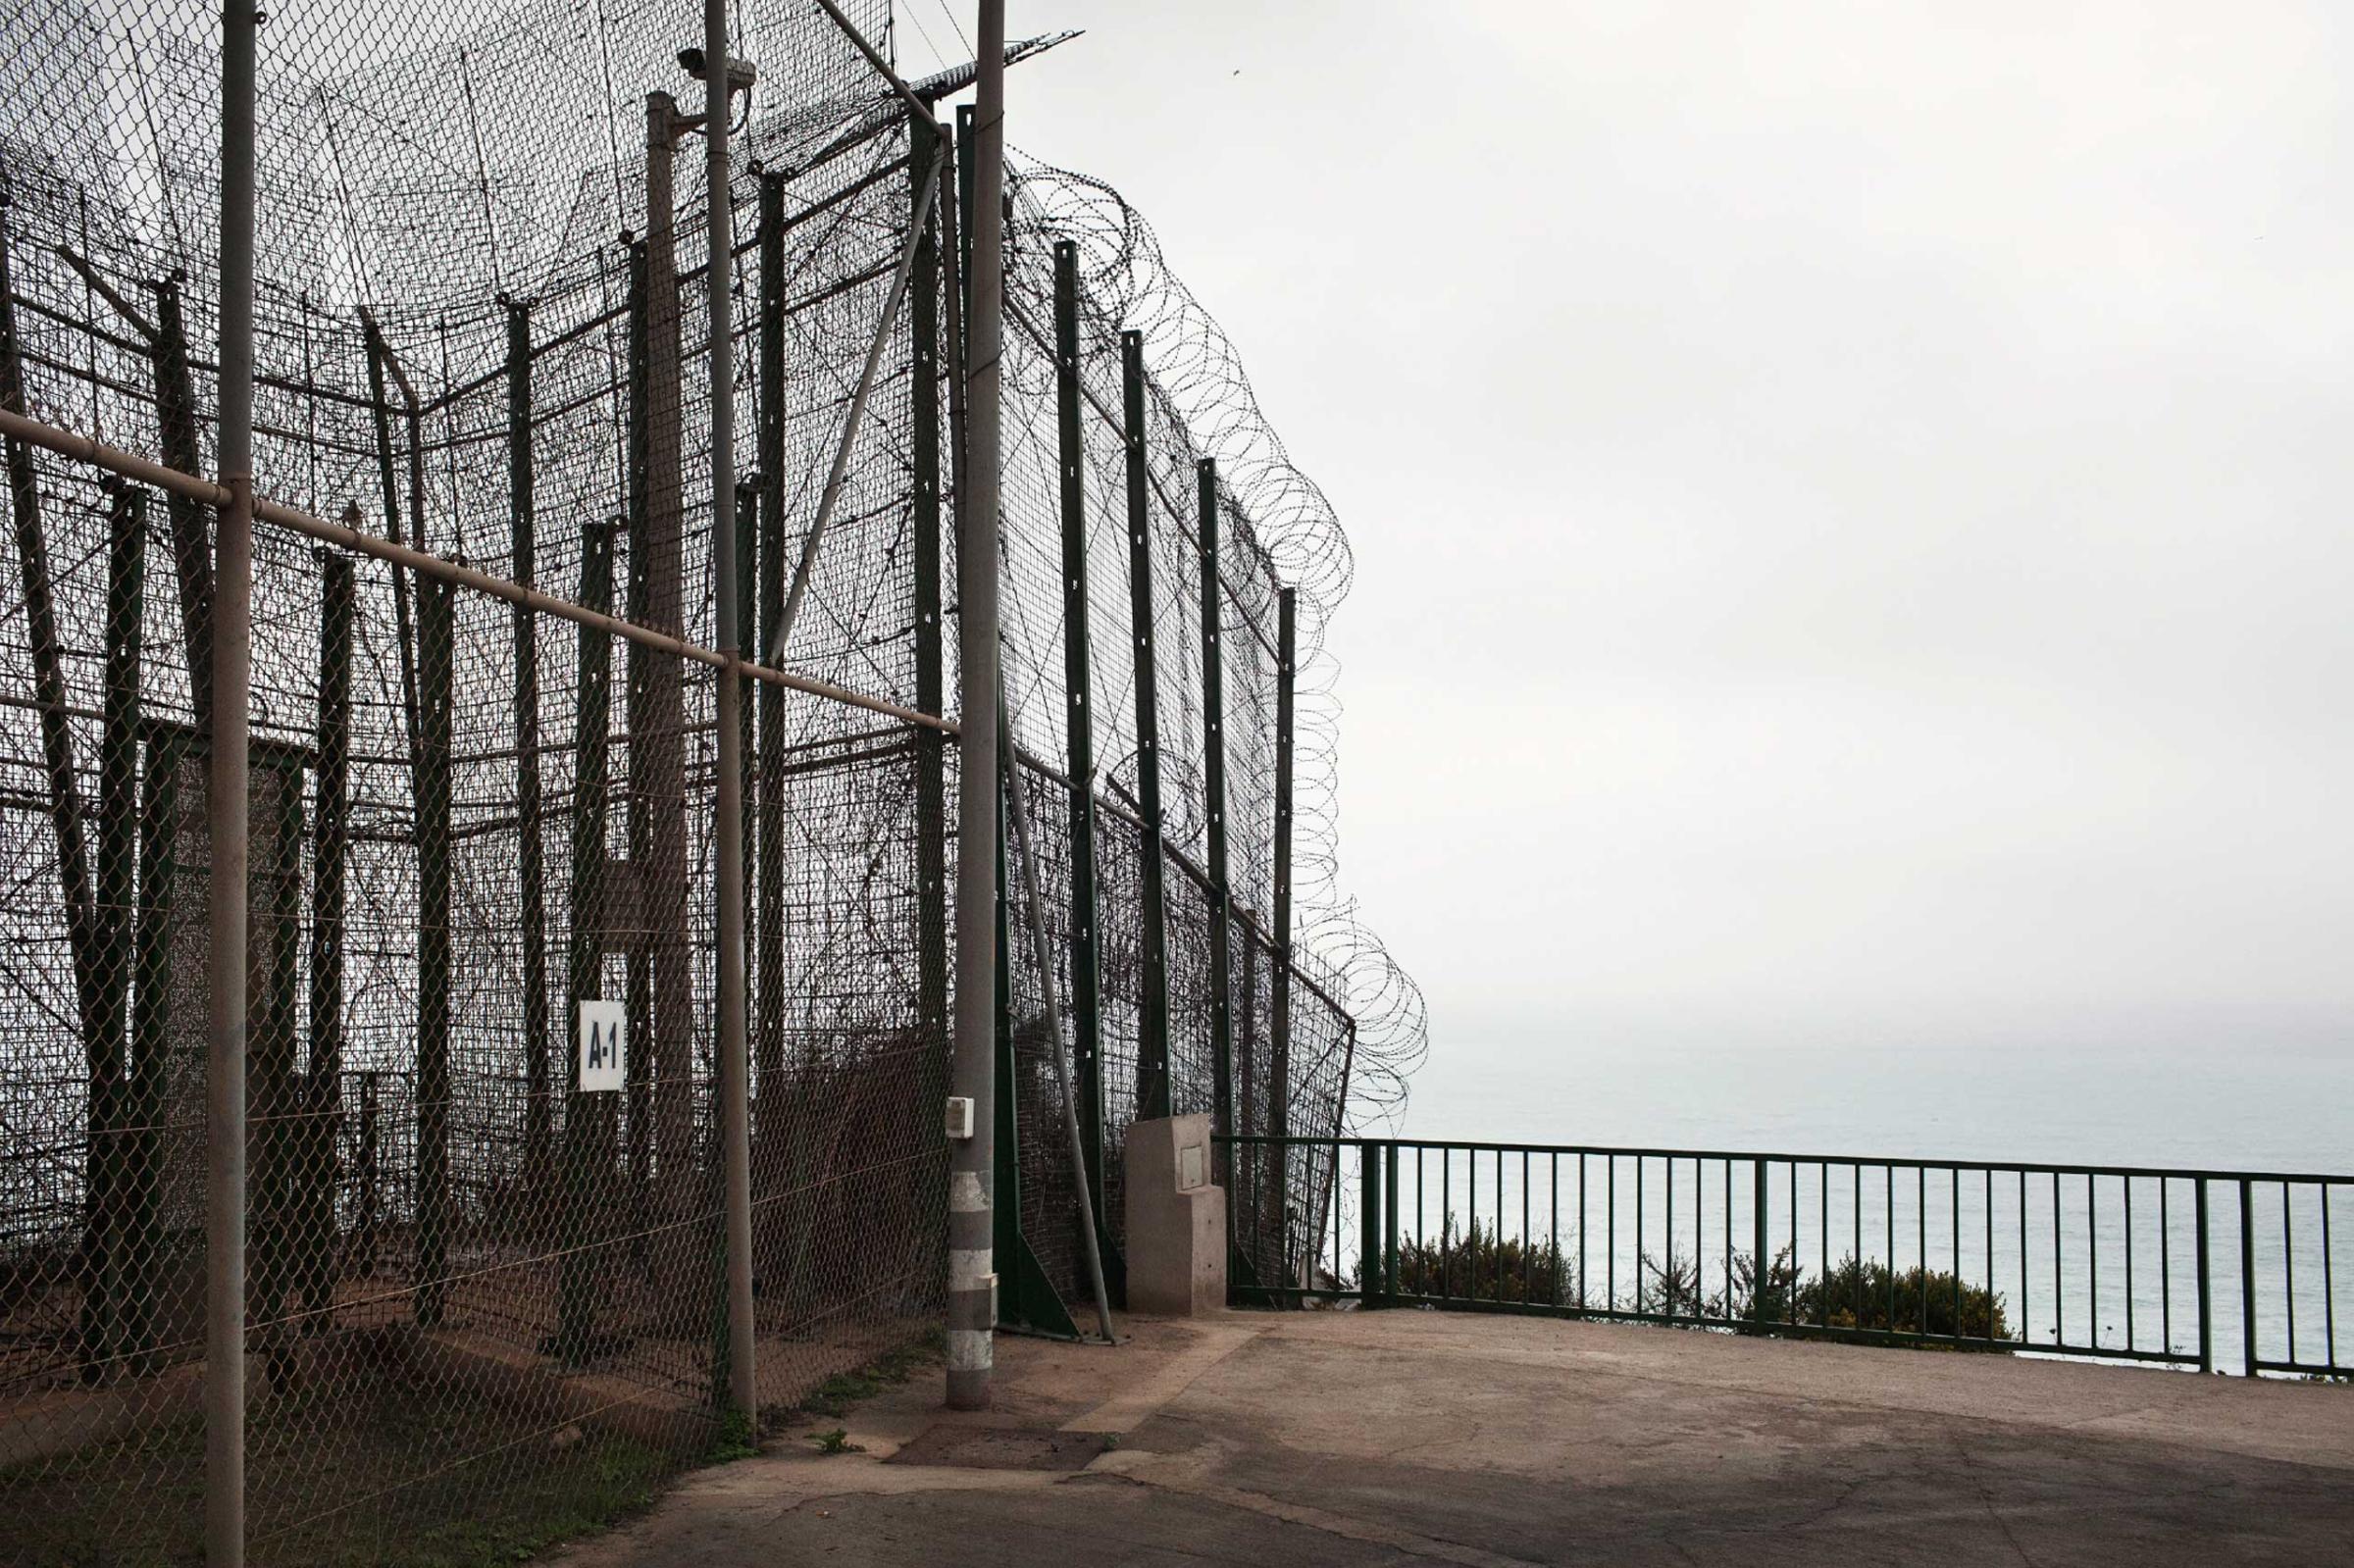 The border fence that divides the Moroccan city of Nador from the Spanish enclave of Melilla, in Northern Africa, 2012. The security fence which runs the full length of the border has heavy security, including a 19-foot-tall double fence with watchtowers, and is as a popular crossing for sub-Saharan migrants hoping to illegally reach Spain.